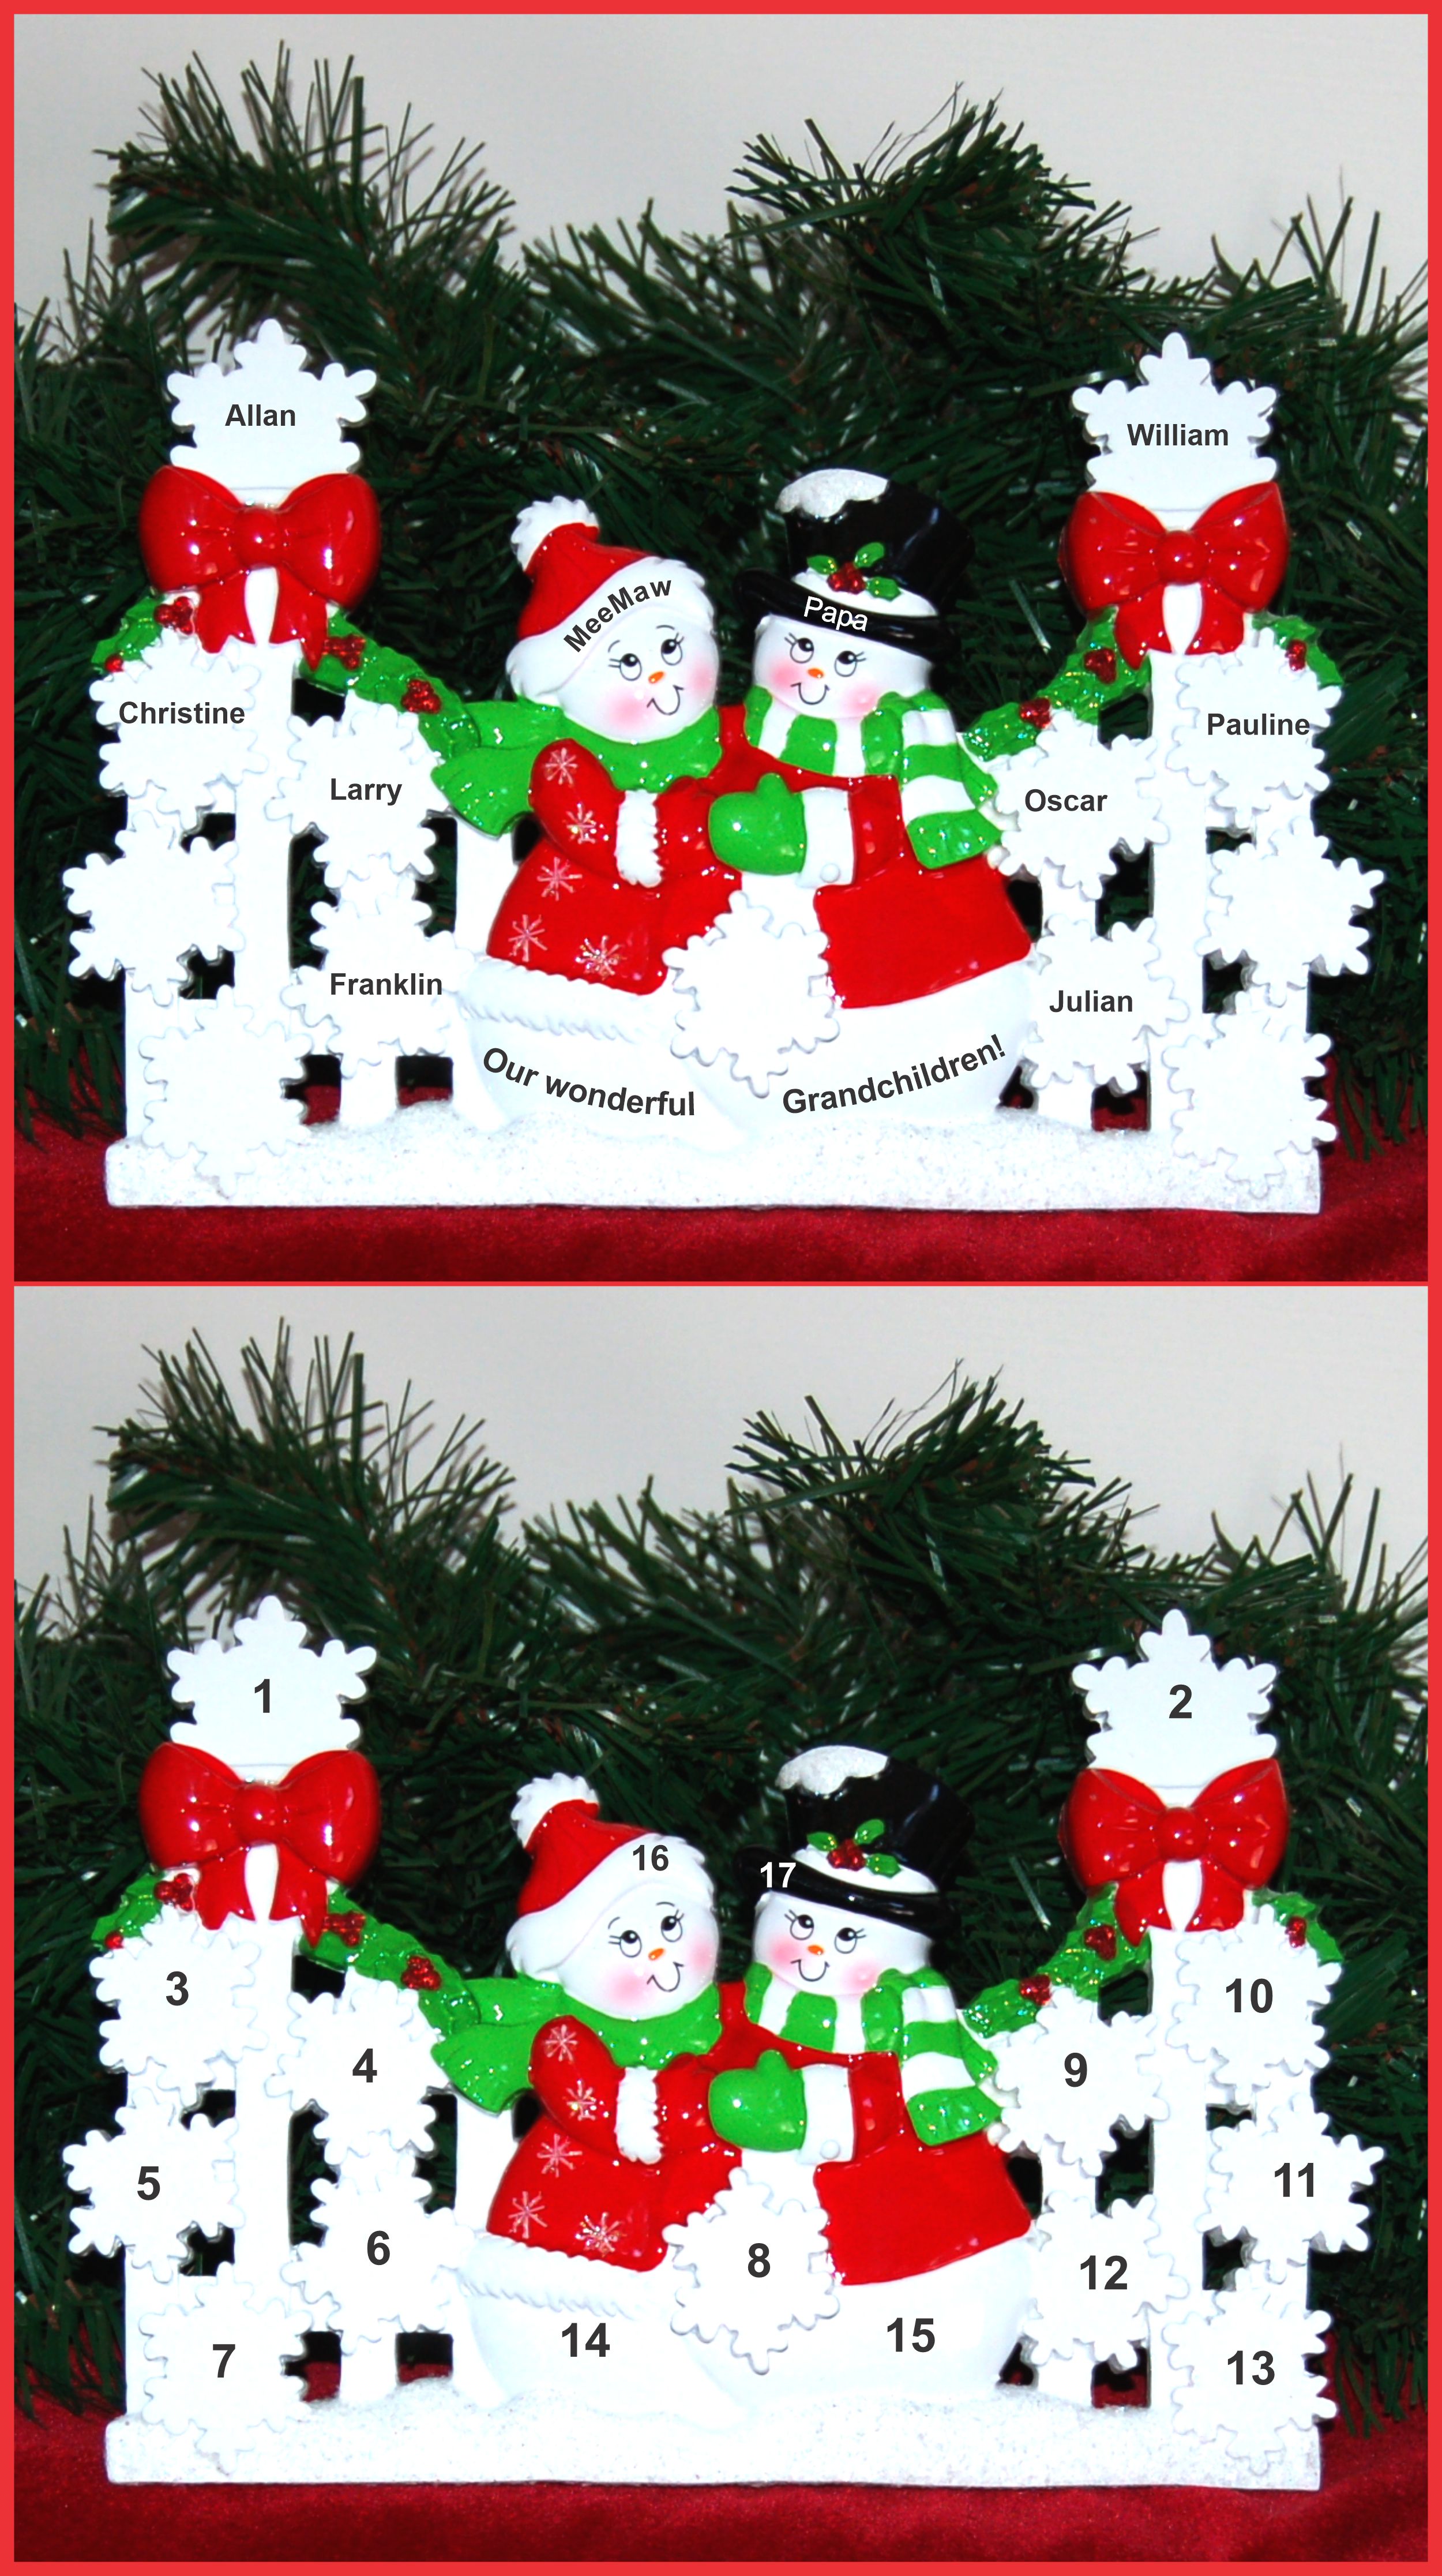 Tabletop Christmas Decoration Snowflakes for 7 Grandchildren Personalized by RussellRhodes.com